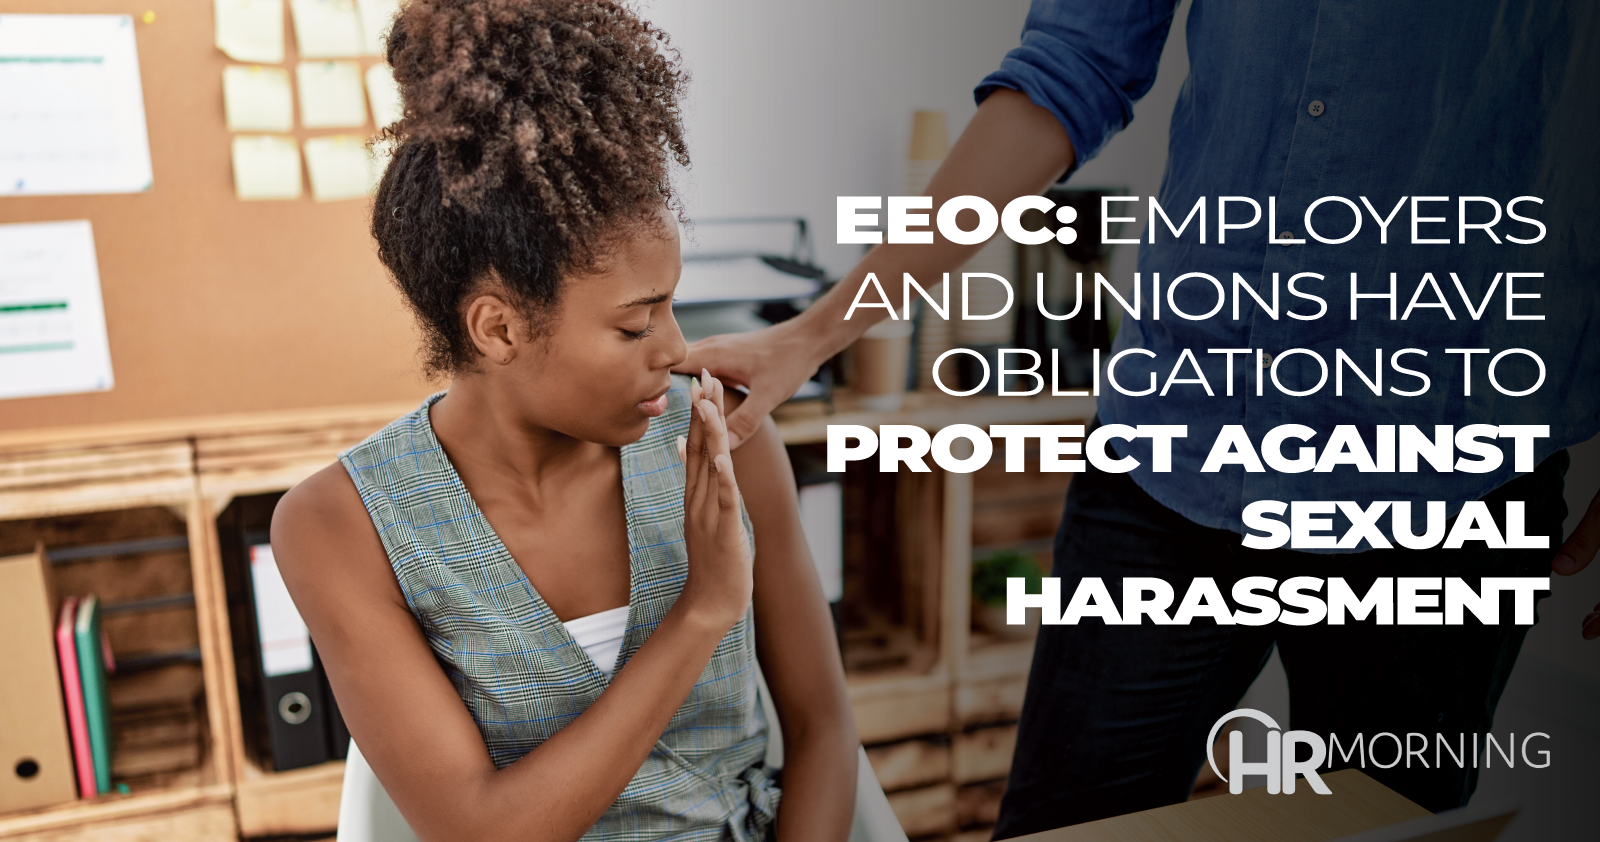 EEOC: Employers and unions have obligations to protect against sexual harassment